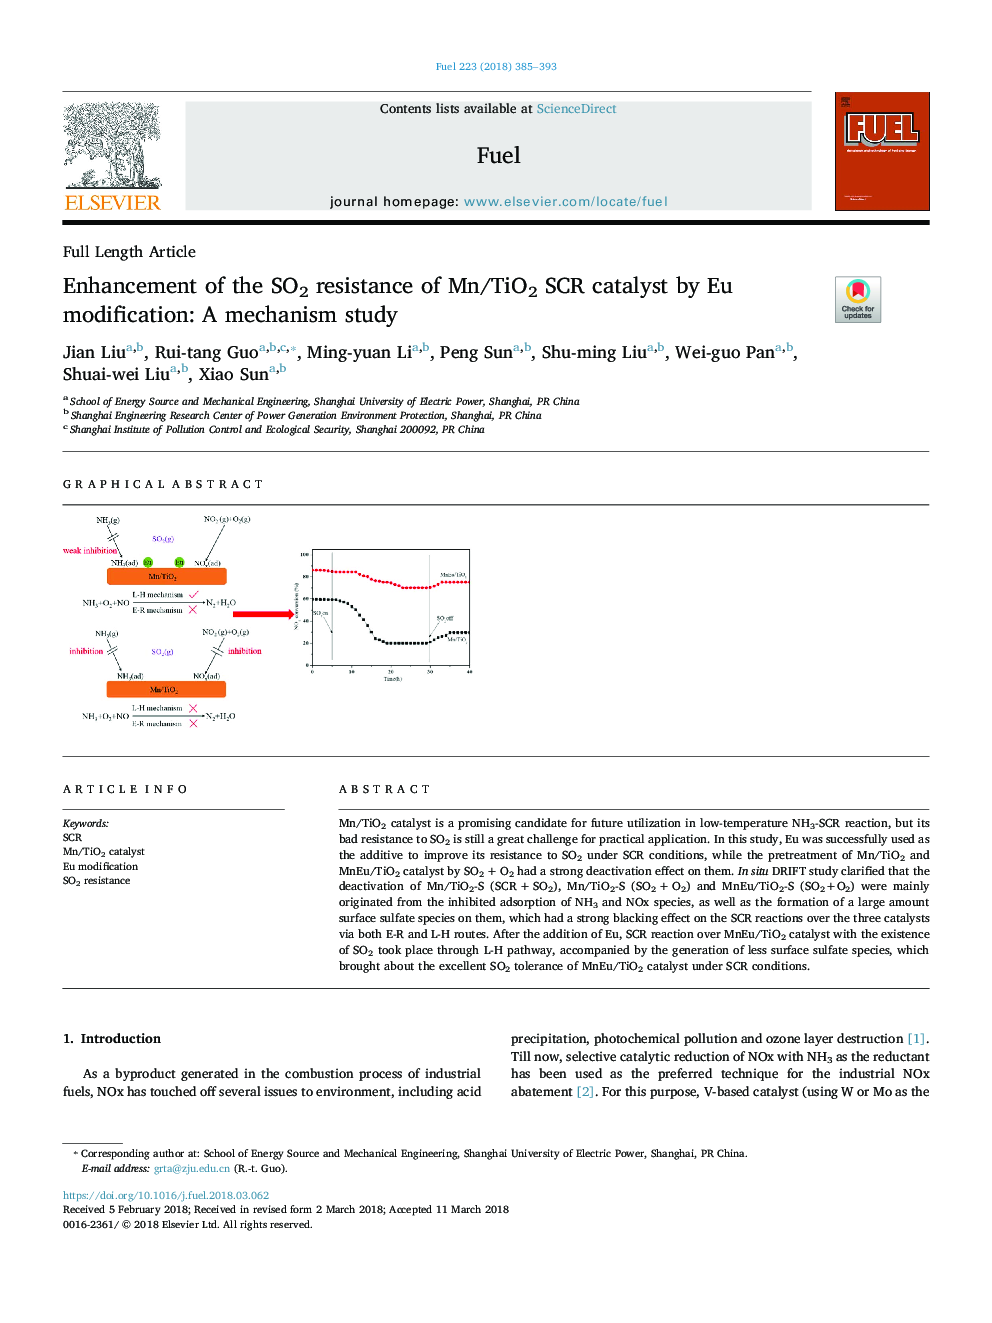 Enhancement of the SO2 resistance of Mn/TiO2 SCR catalyst by Eu modification: A mechanism study